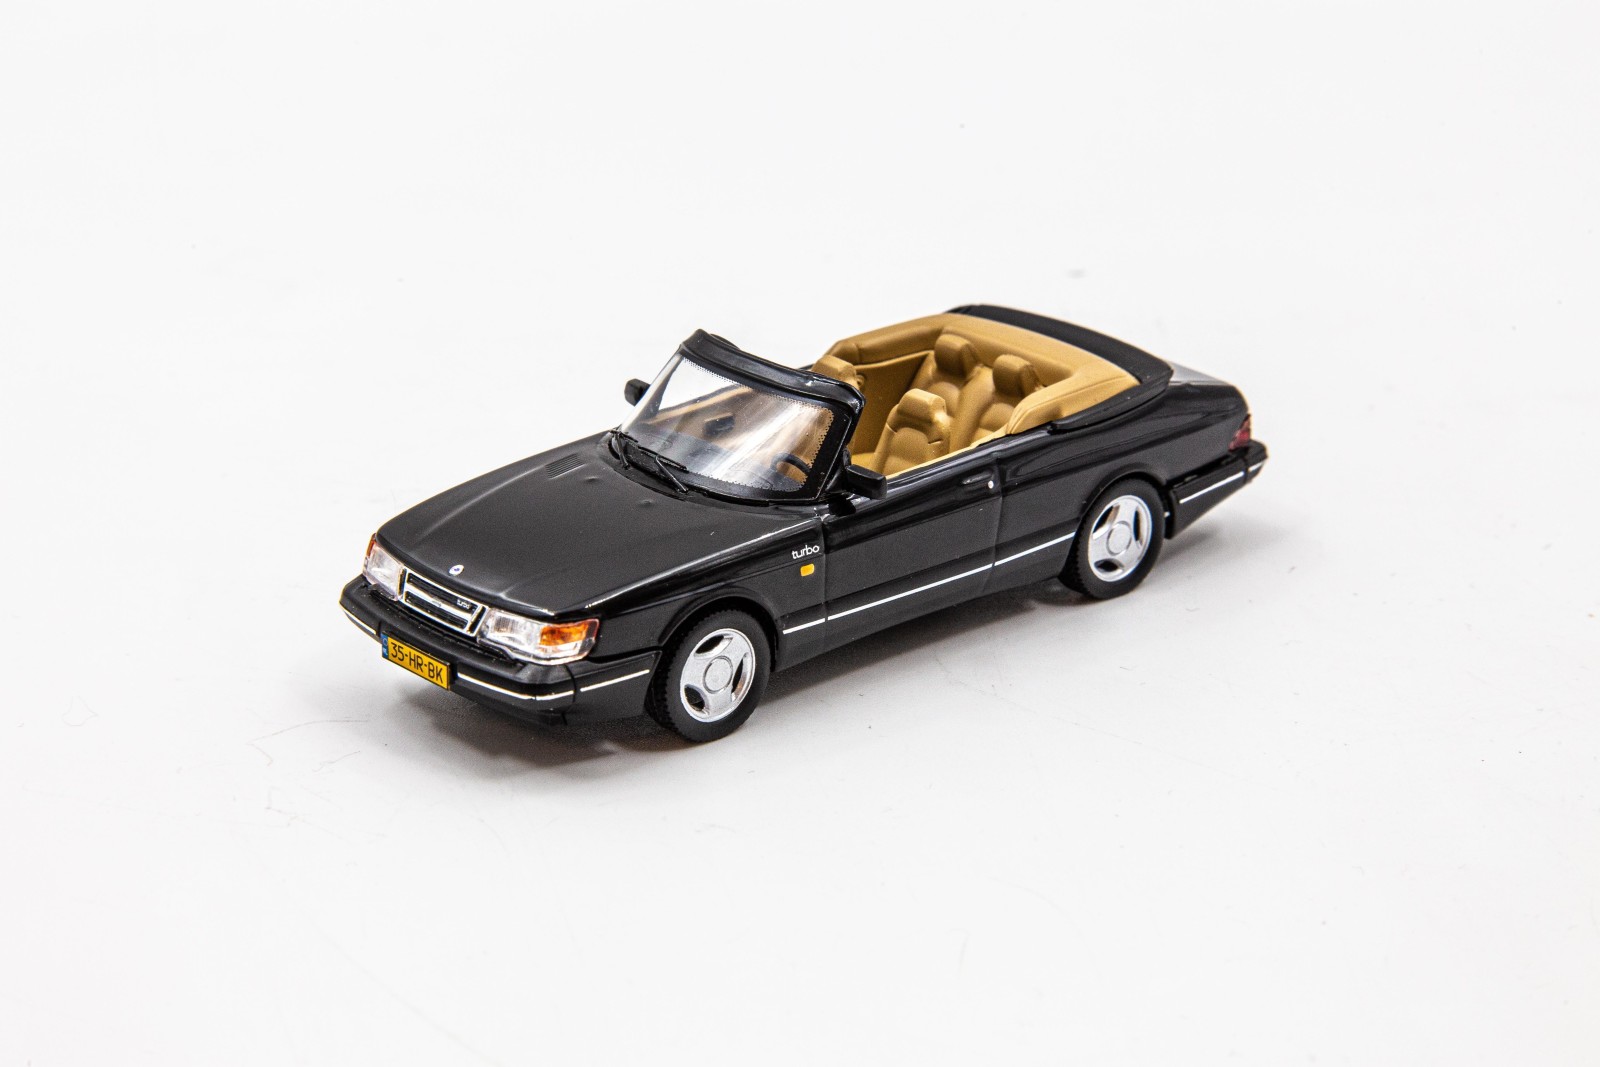 1/43 NOREV SAAB 900 TURBO 16 CABRIOLET DIECAST CAR MODEL COLLECTION FOR GIFT 